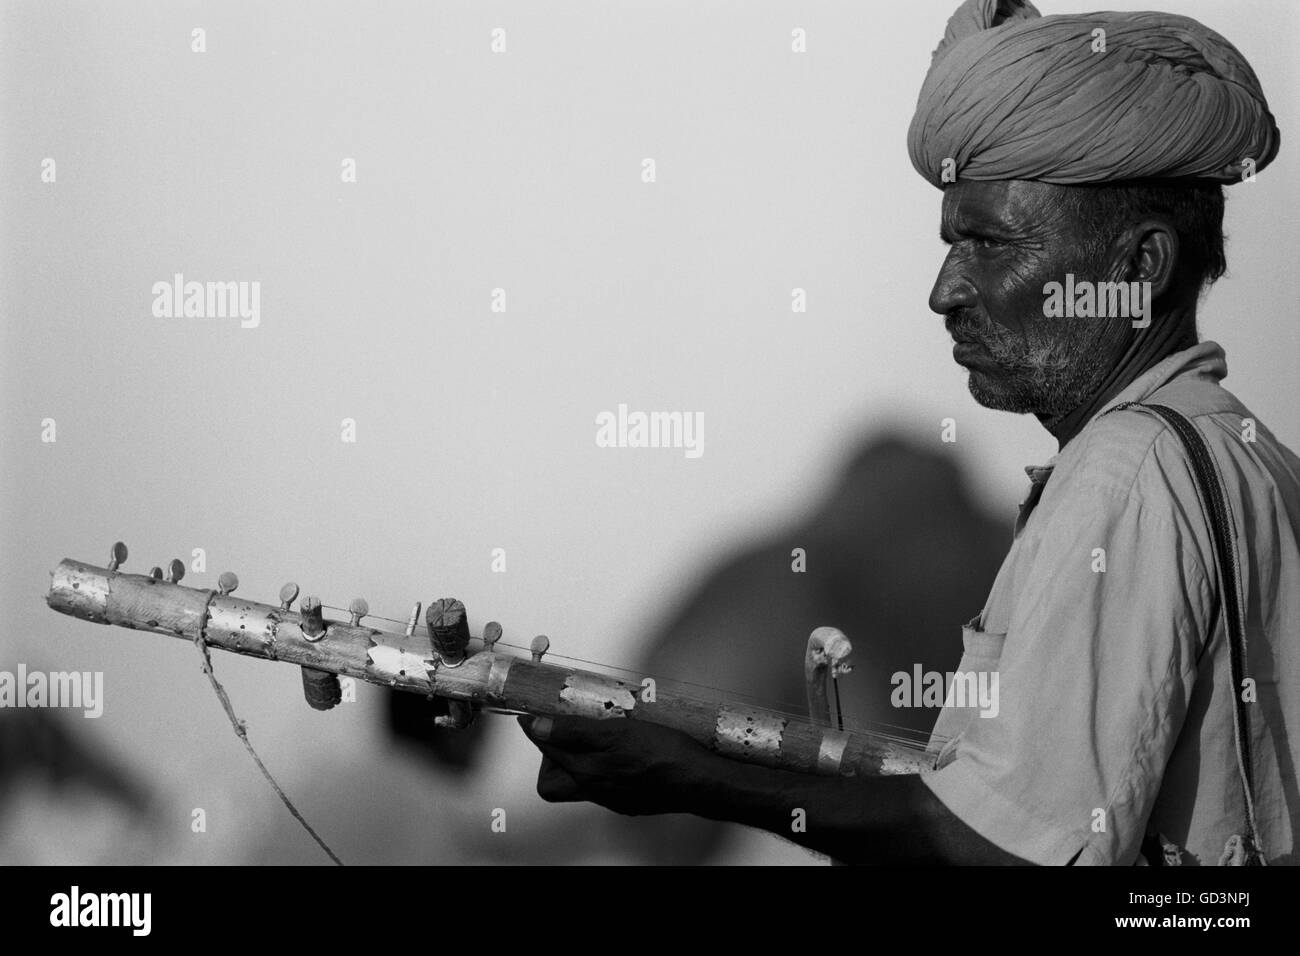 Man playing a musical instrument Stock Photo